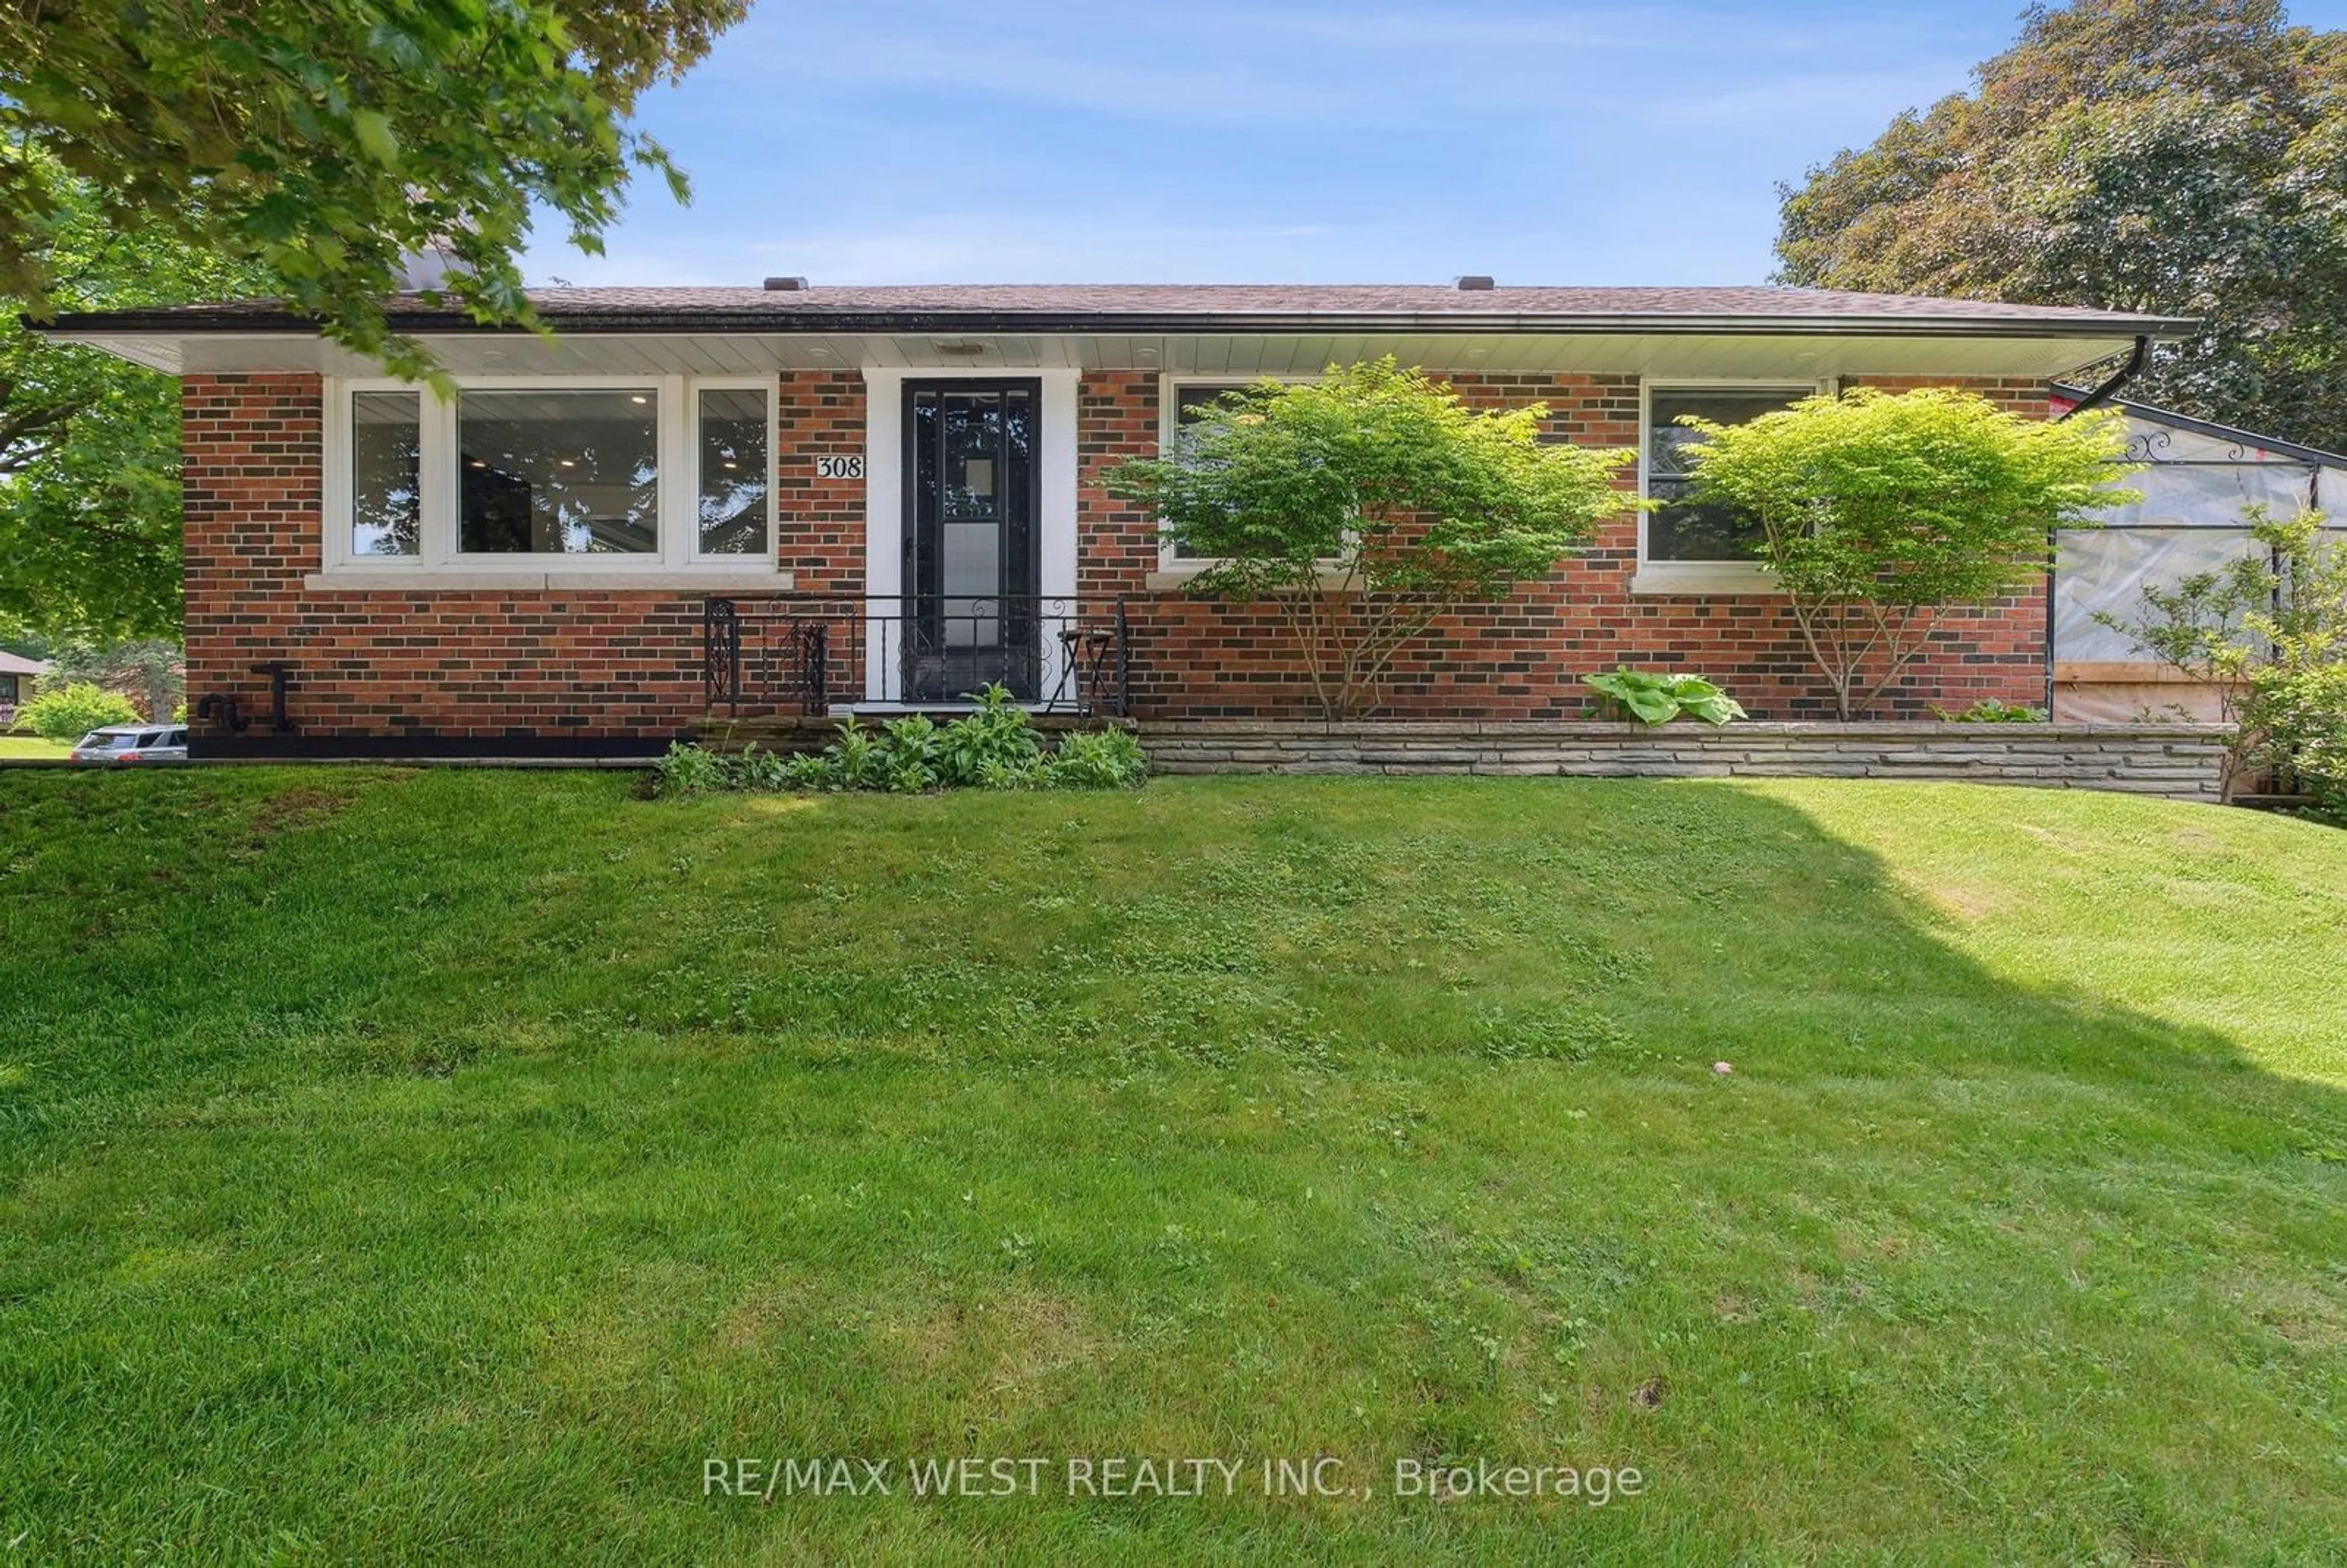 Home with brick exterior material for 308 Donlin Ave, Newmarket Ontario L3Y 4T6